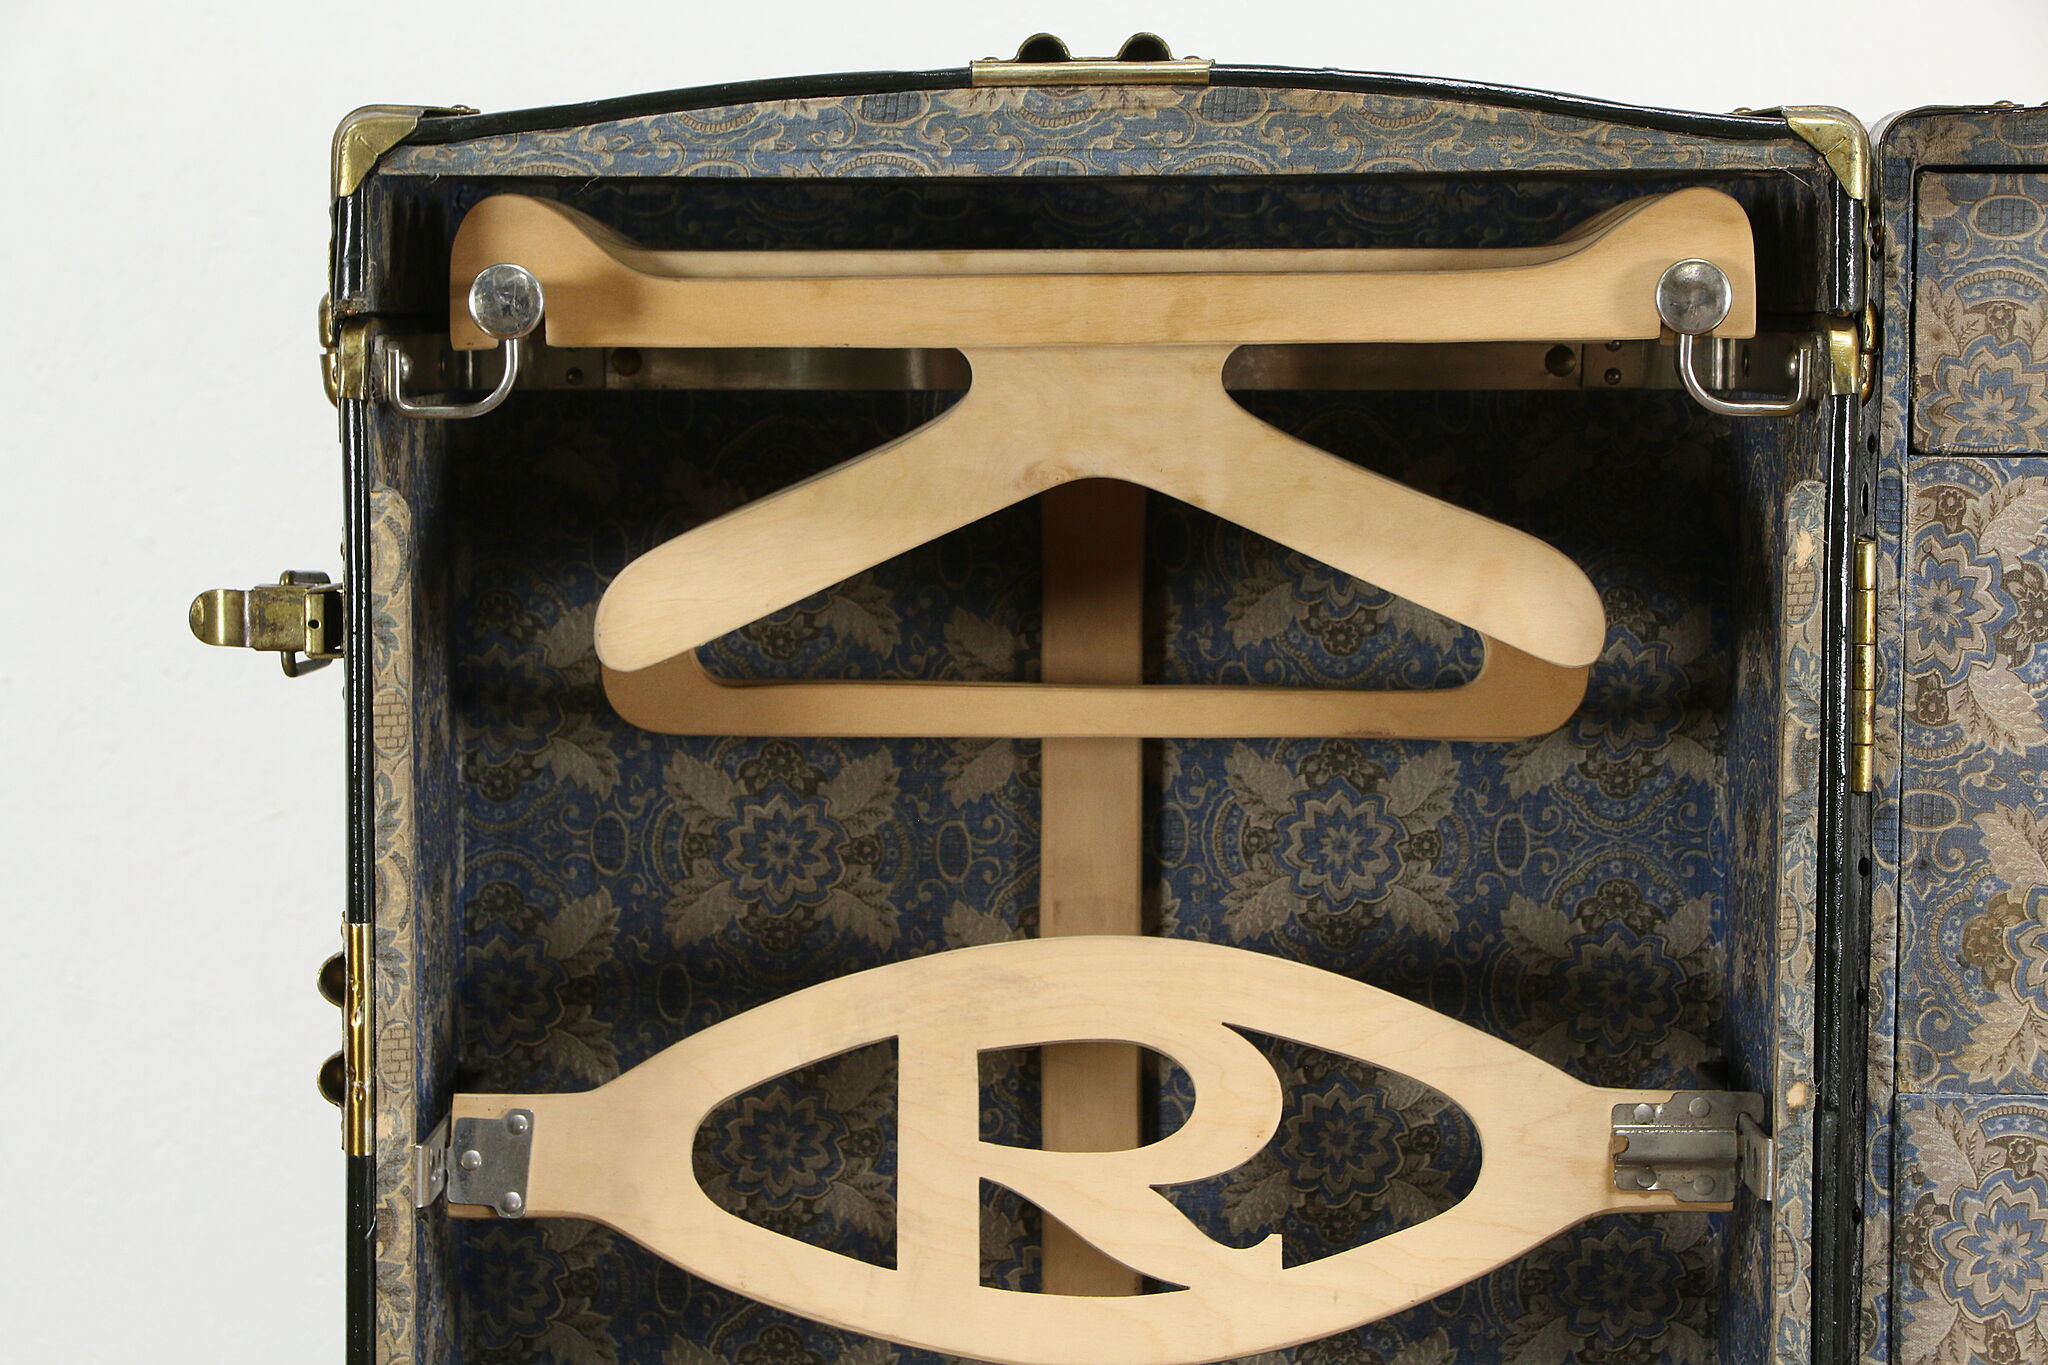 Travel Trunks from Oshkosh Trunk Company American, 1923 for sale at Pamono